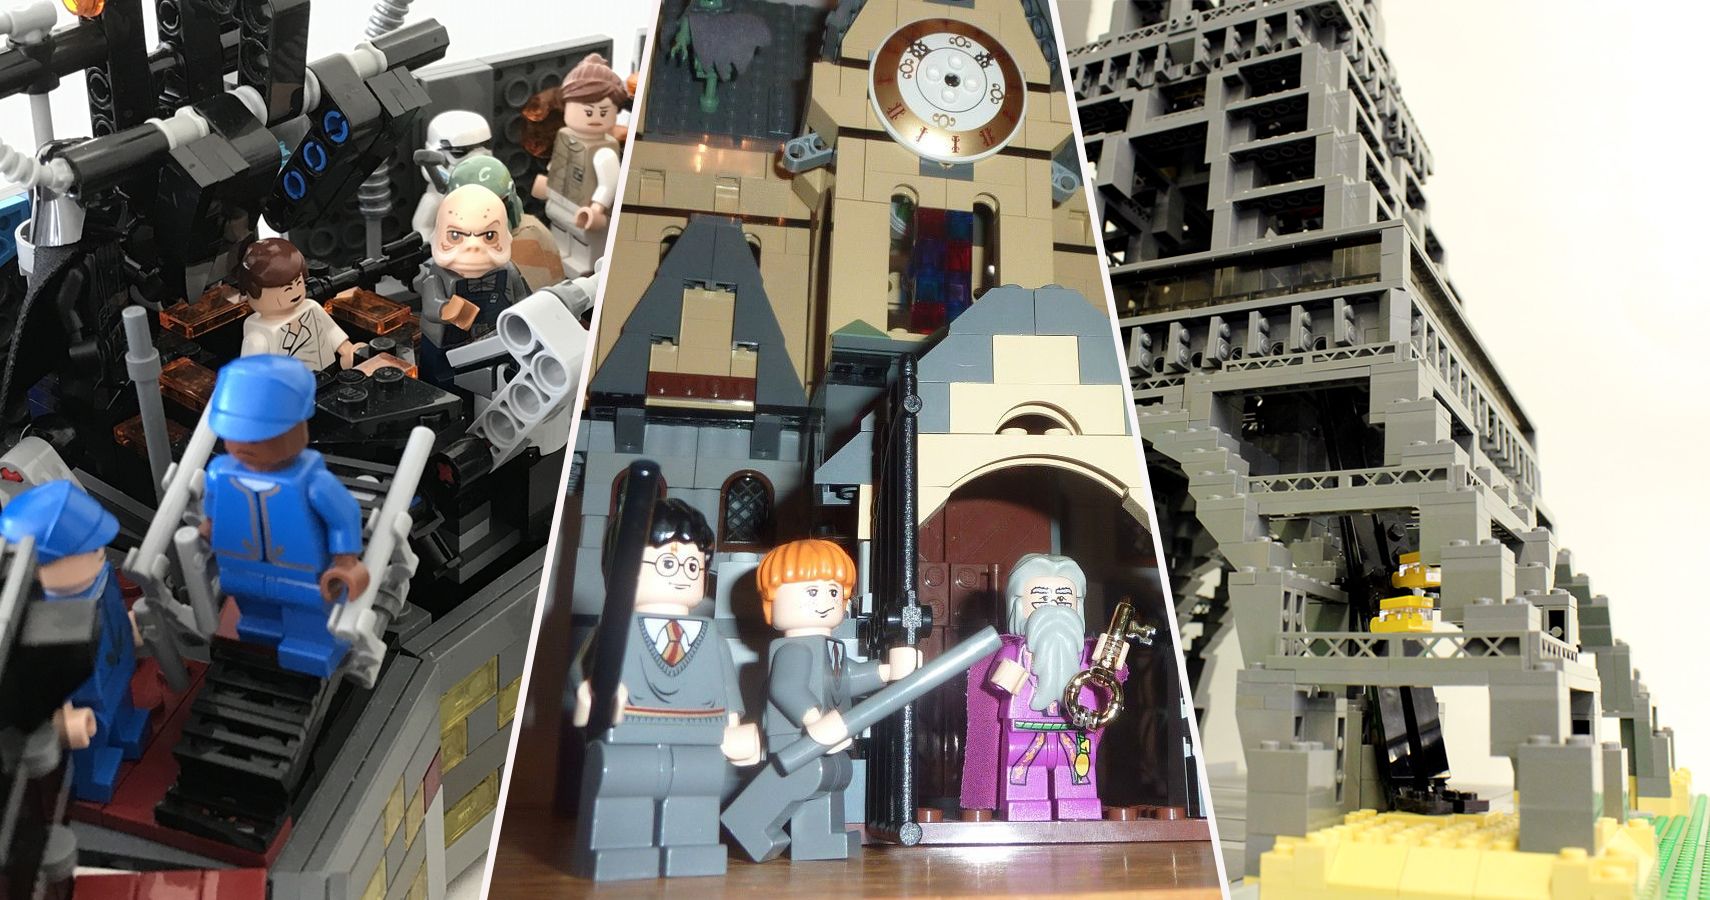 25 Lego Sets Are Impossible To Find (And How Much They're Worth)